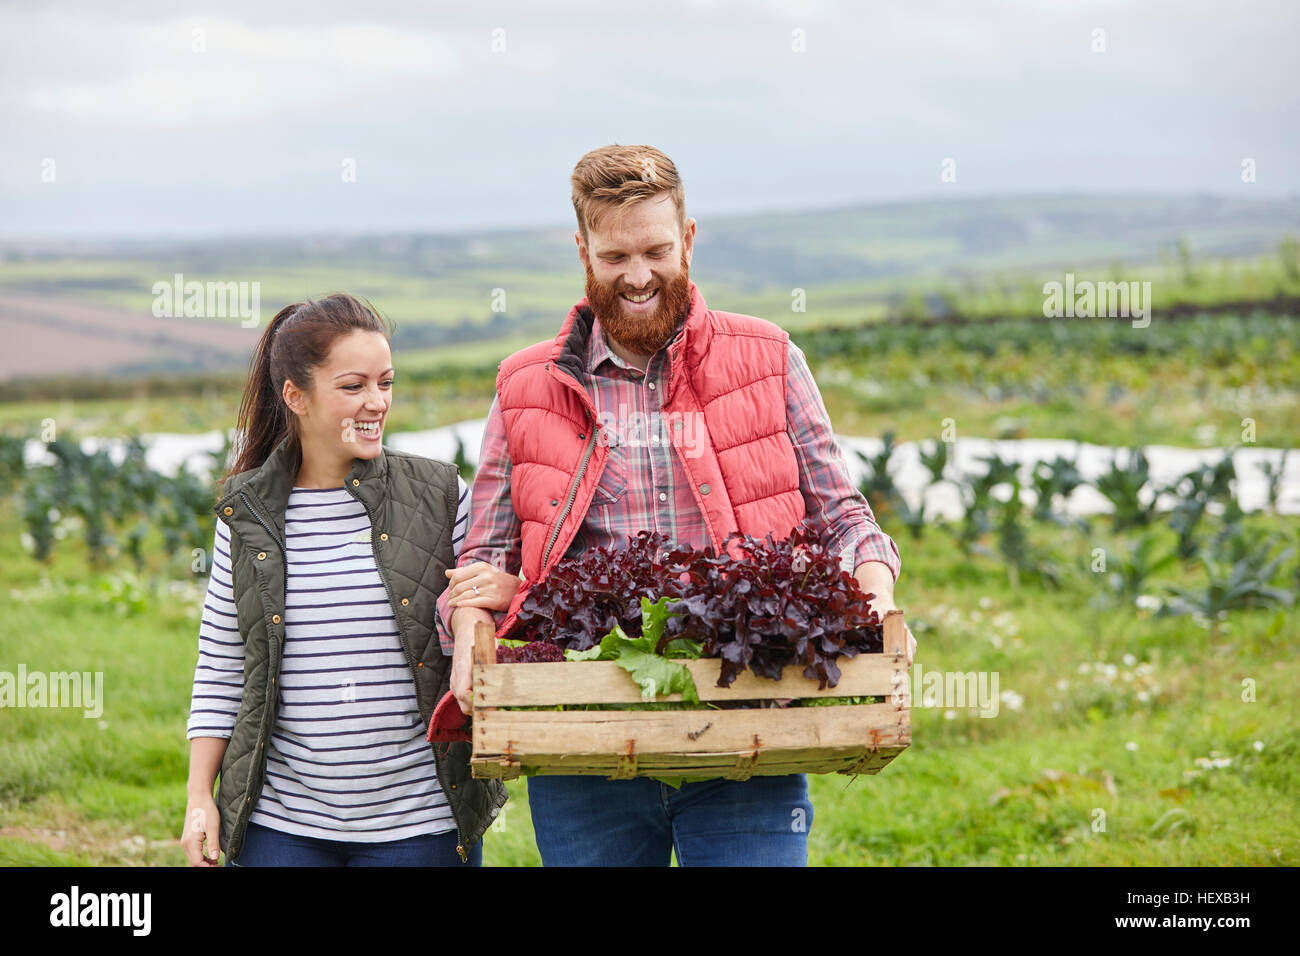 Couple on farm holding freshly harvested lettuce in wooden crate Stock Photo